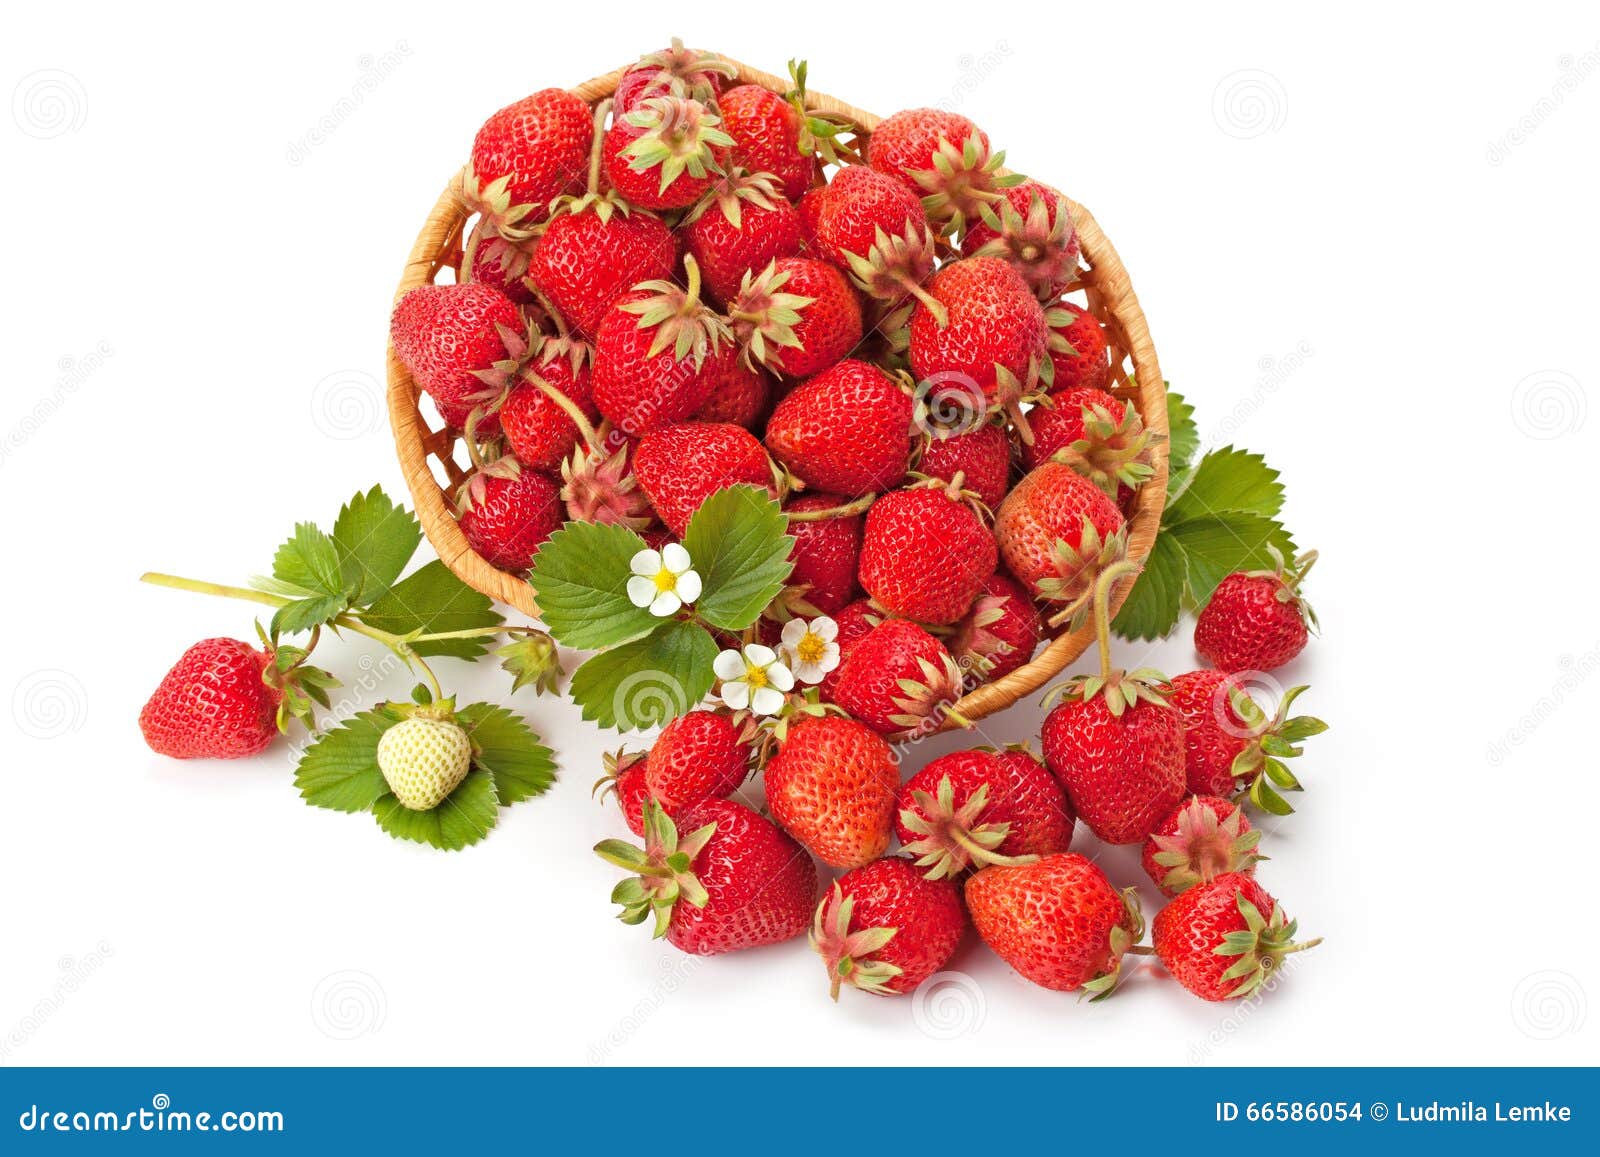 Sweet, fragrant strawberries in a wicker basket isolated on white background